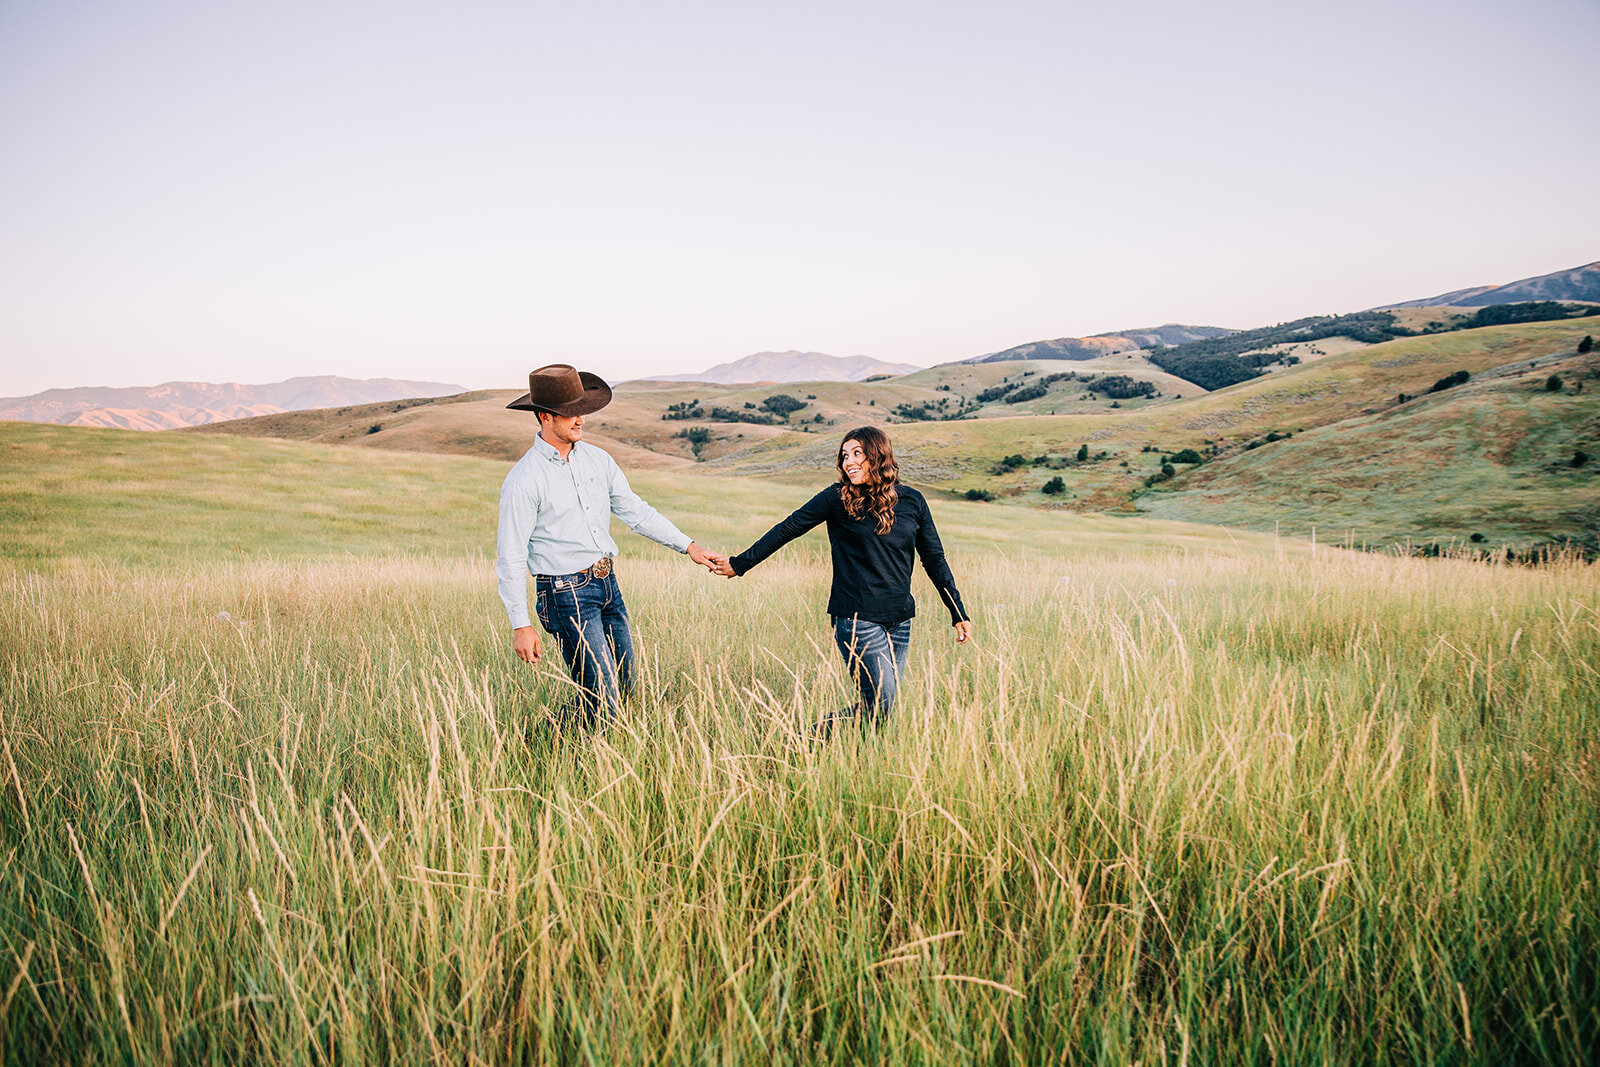  happy couple blue jeans semi-formal attire country engagement outfit inspo lead me poses holding hands couple posing ideas engagement posing inspo walking together hairstyles for women future husband and wife summer sun paradise Utah cache valley ph